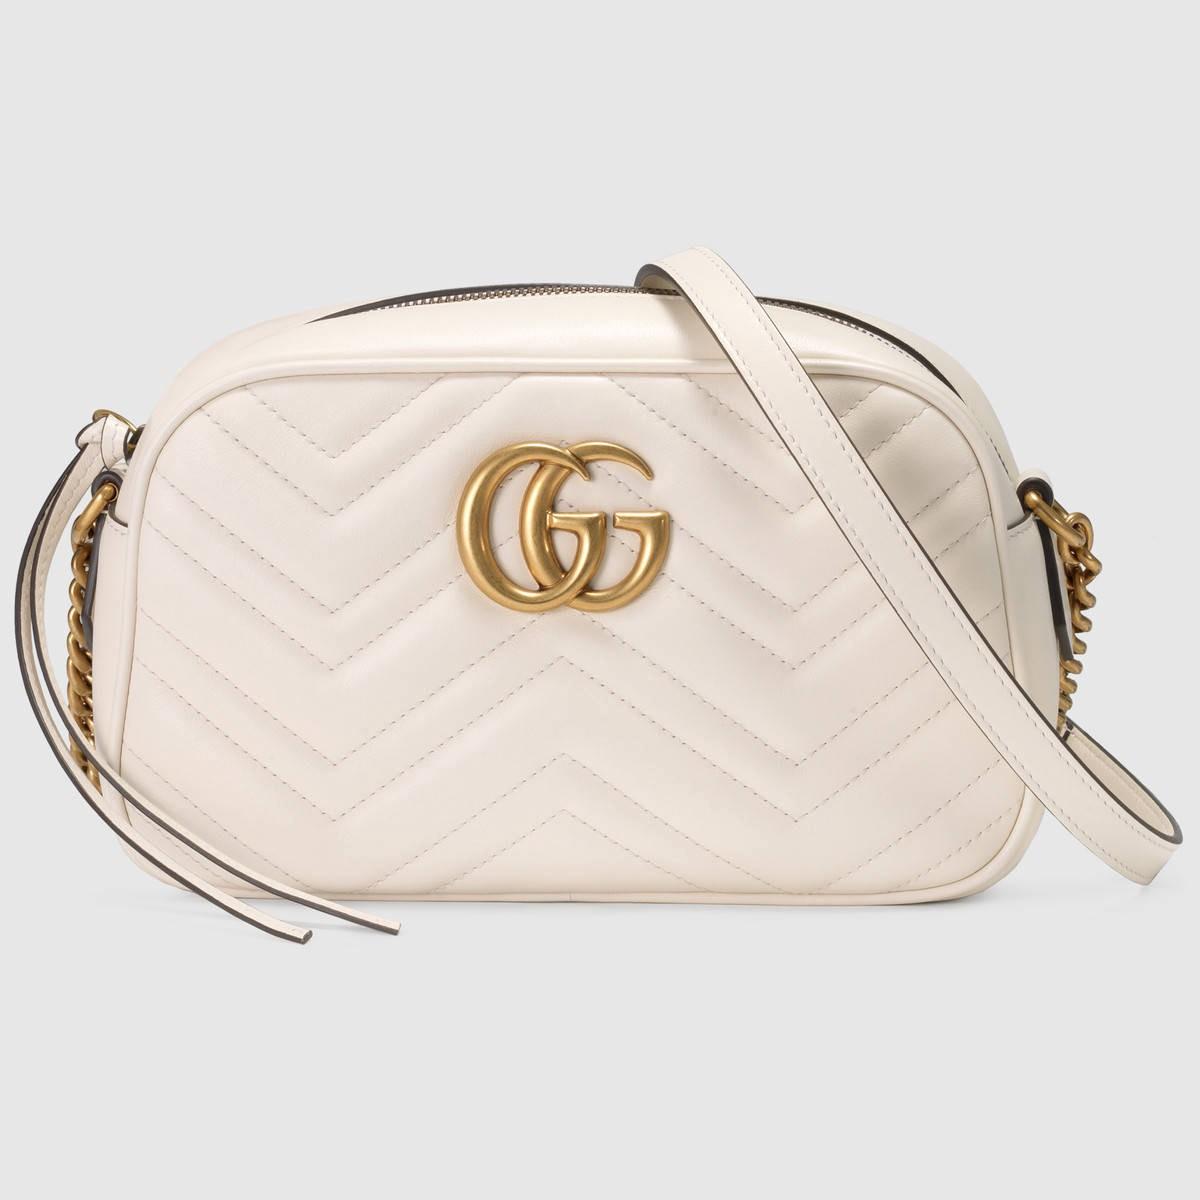 Gucci Gg Marmont Small Shoulder Bag - White Leather | ModeSens